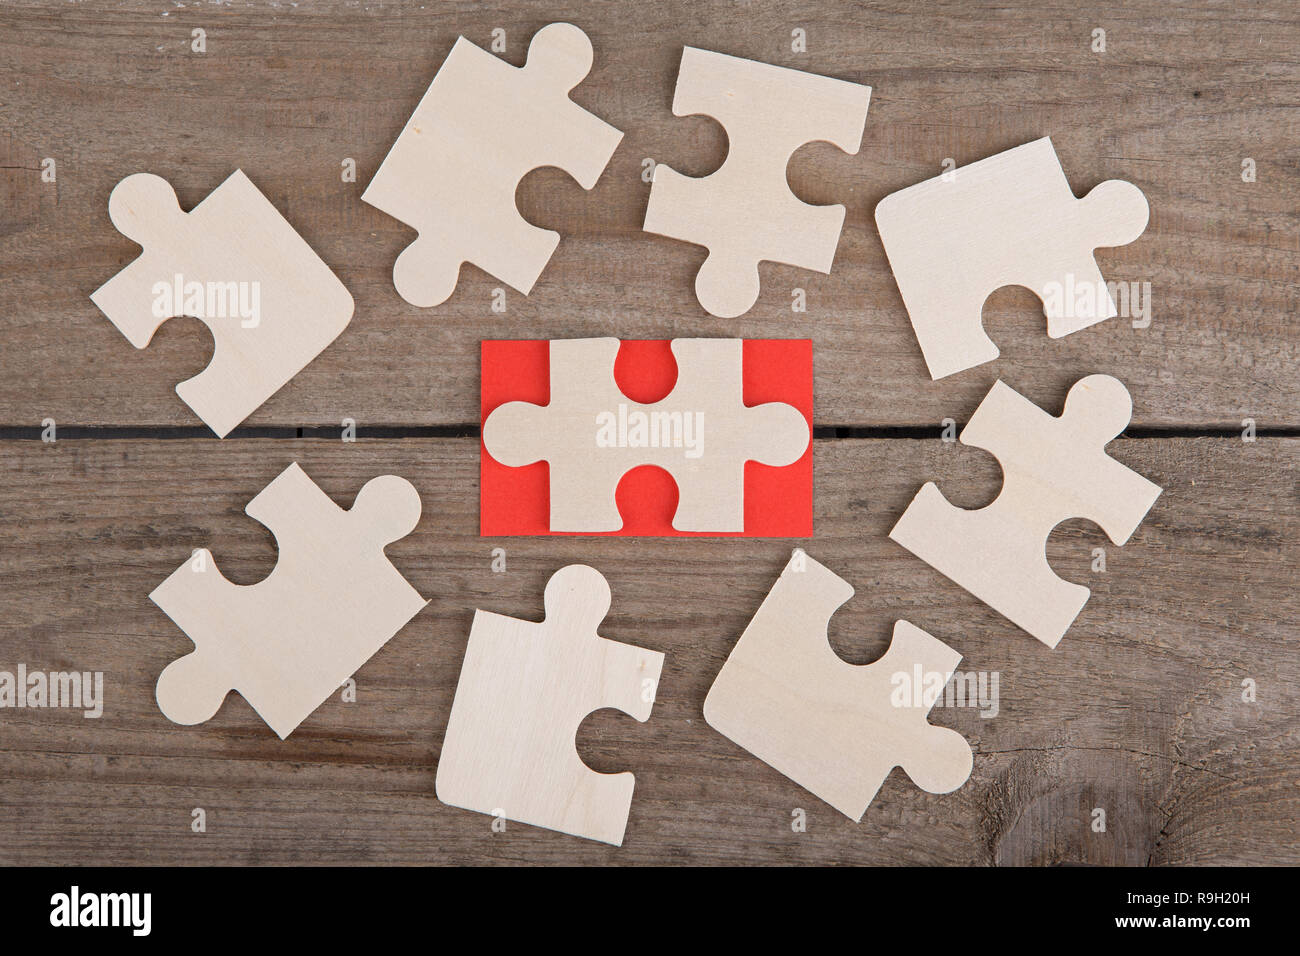 Business Teamwork Concept - Jigsaw Puzzle Pieces on wooden background Stock Photo